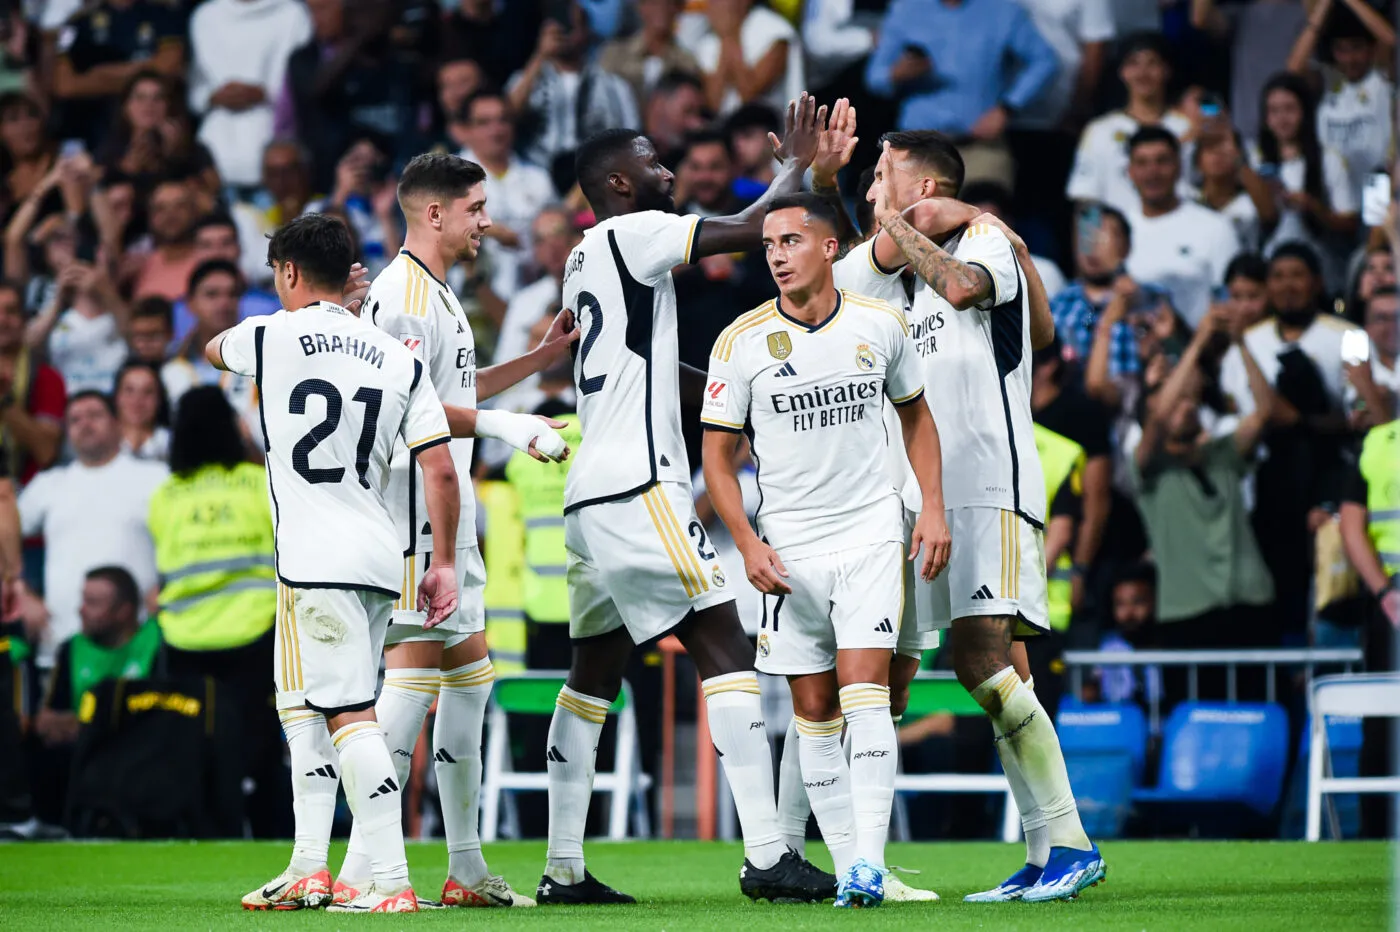 (230928) -- MADRID, Sept. 28, 2023 (Xinhua) -- Players of Real Madrid celebrate a goal during a La Liga football match between Real Madrid and UD Las Palmas in Madrid, Spain, Sept. 27, 2023. (Photo by Gustavo Valiente/Xinhua) - Photo by Icon sport